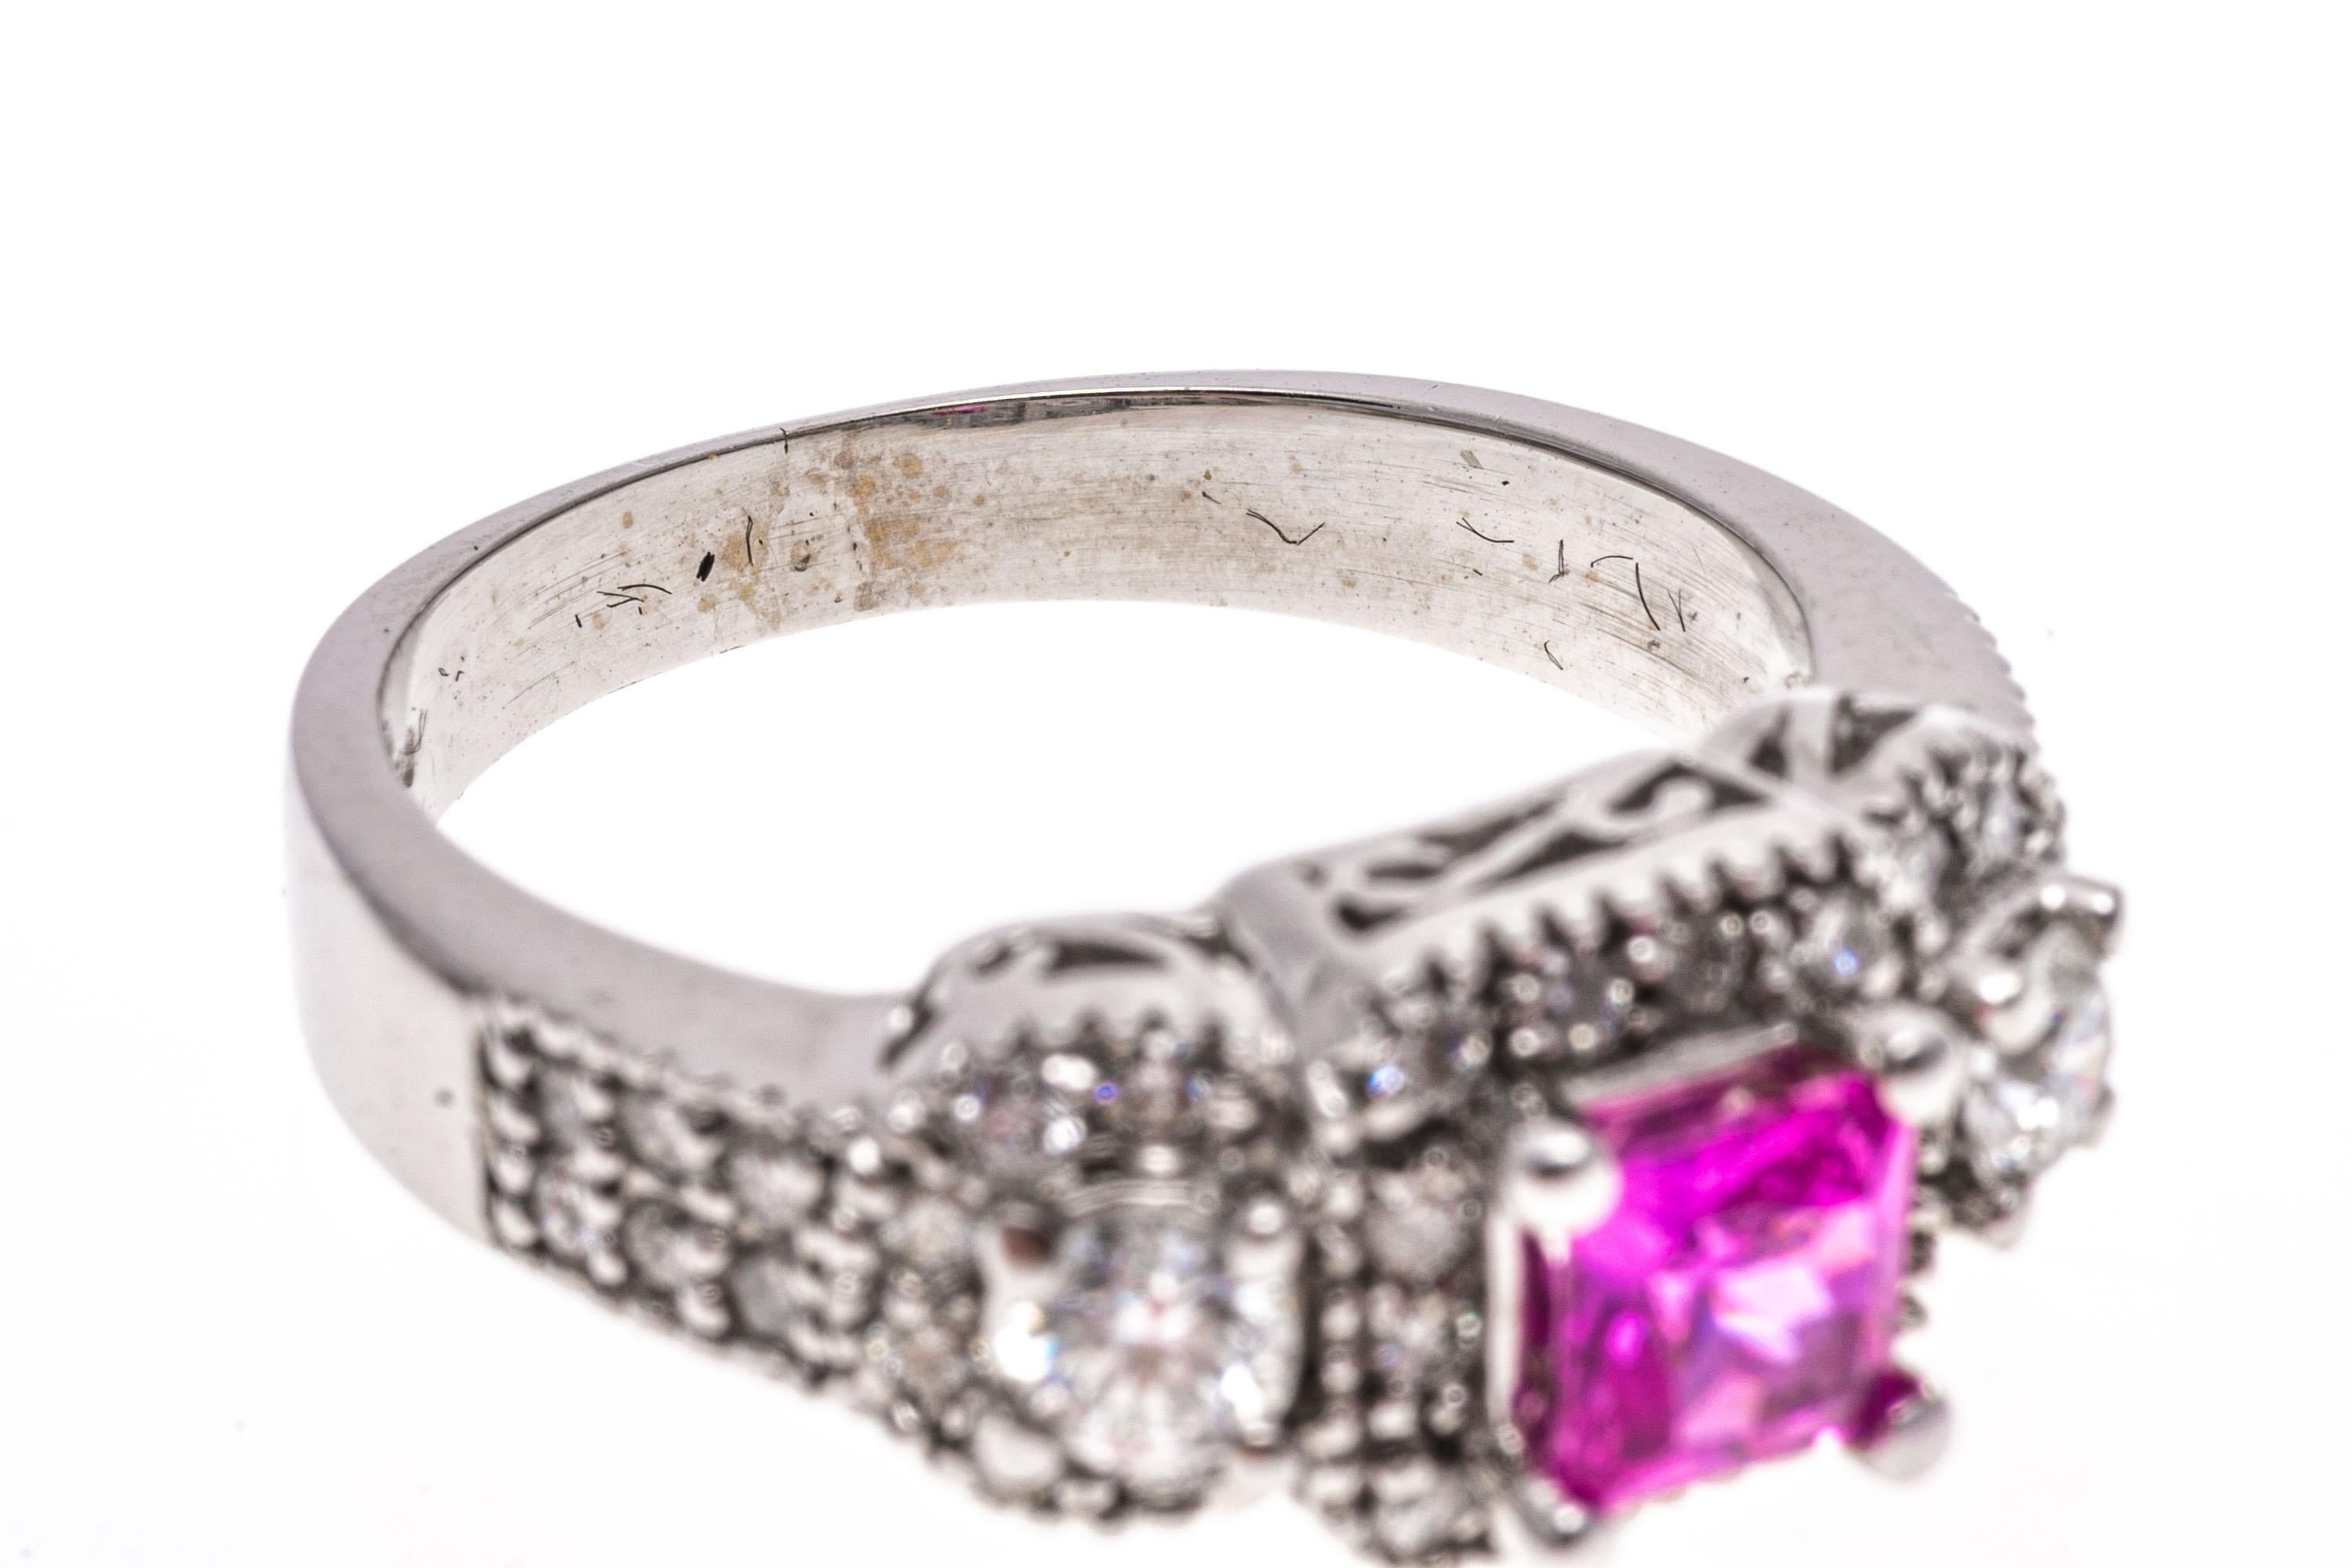 14k white gold ring. This beautiful ring features a center square faceted, medium pink color pink sapphire, approximately 0.47 CTS, decorated with a round faceted diamond halo. The pinks sapphire is flanked by round brilliant cut diamonds, also